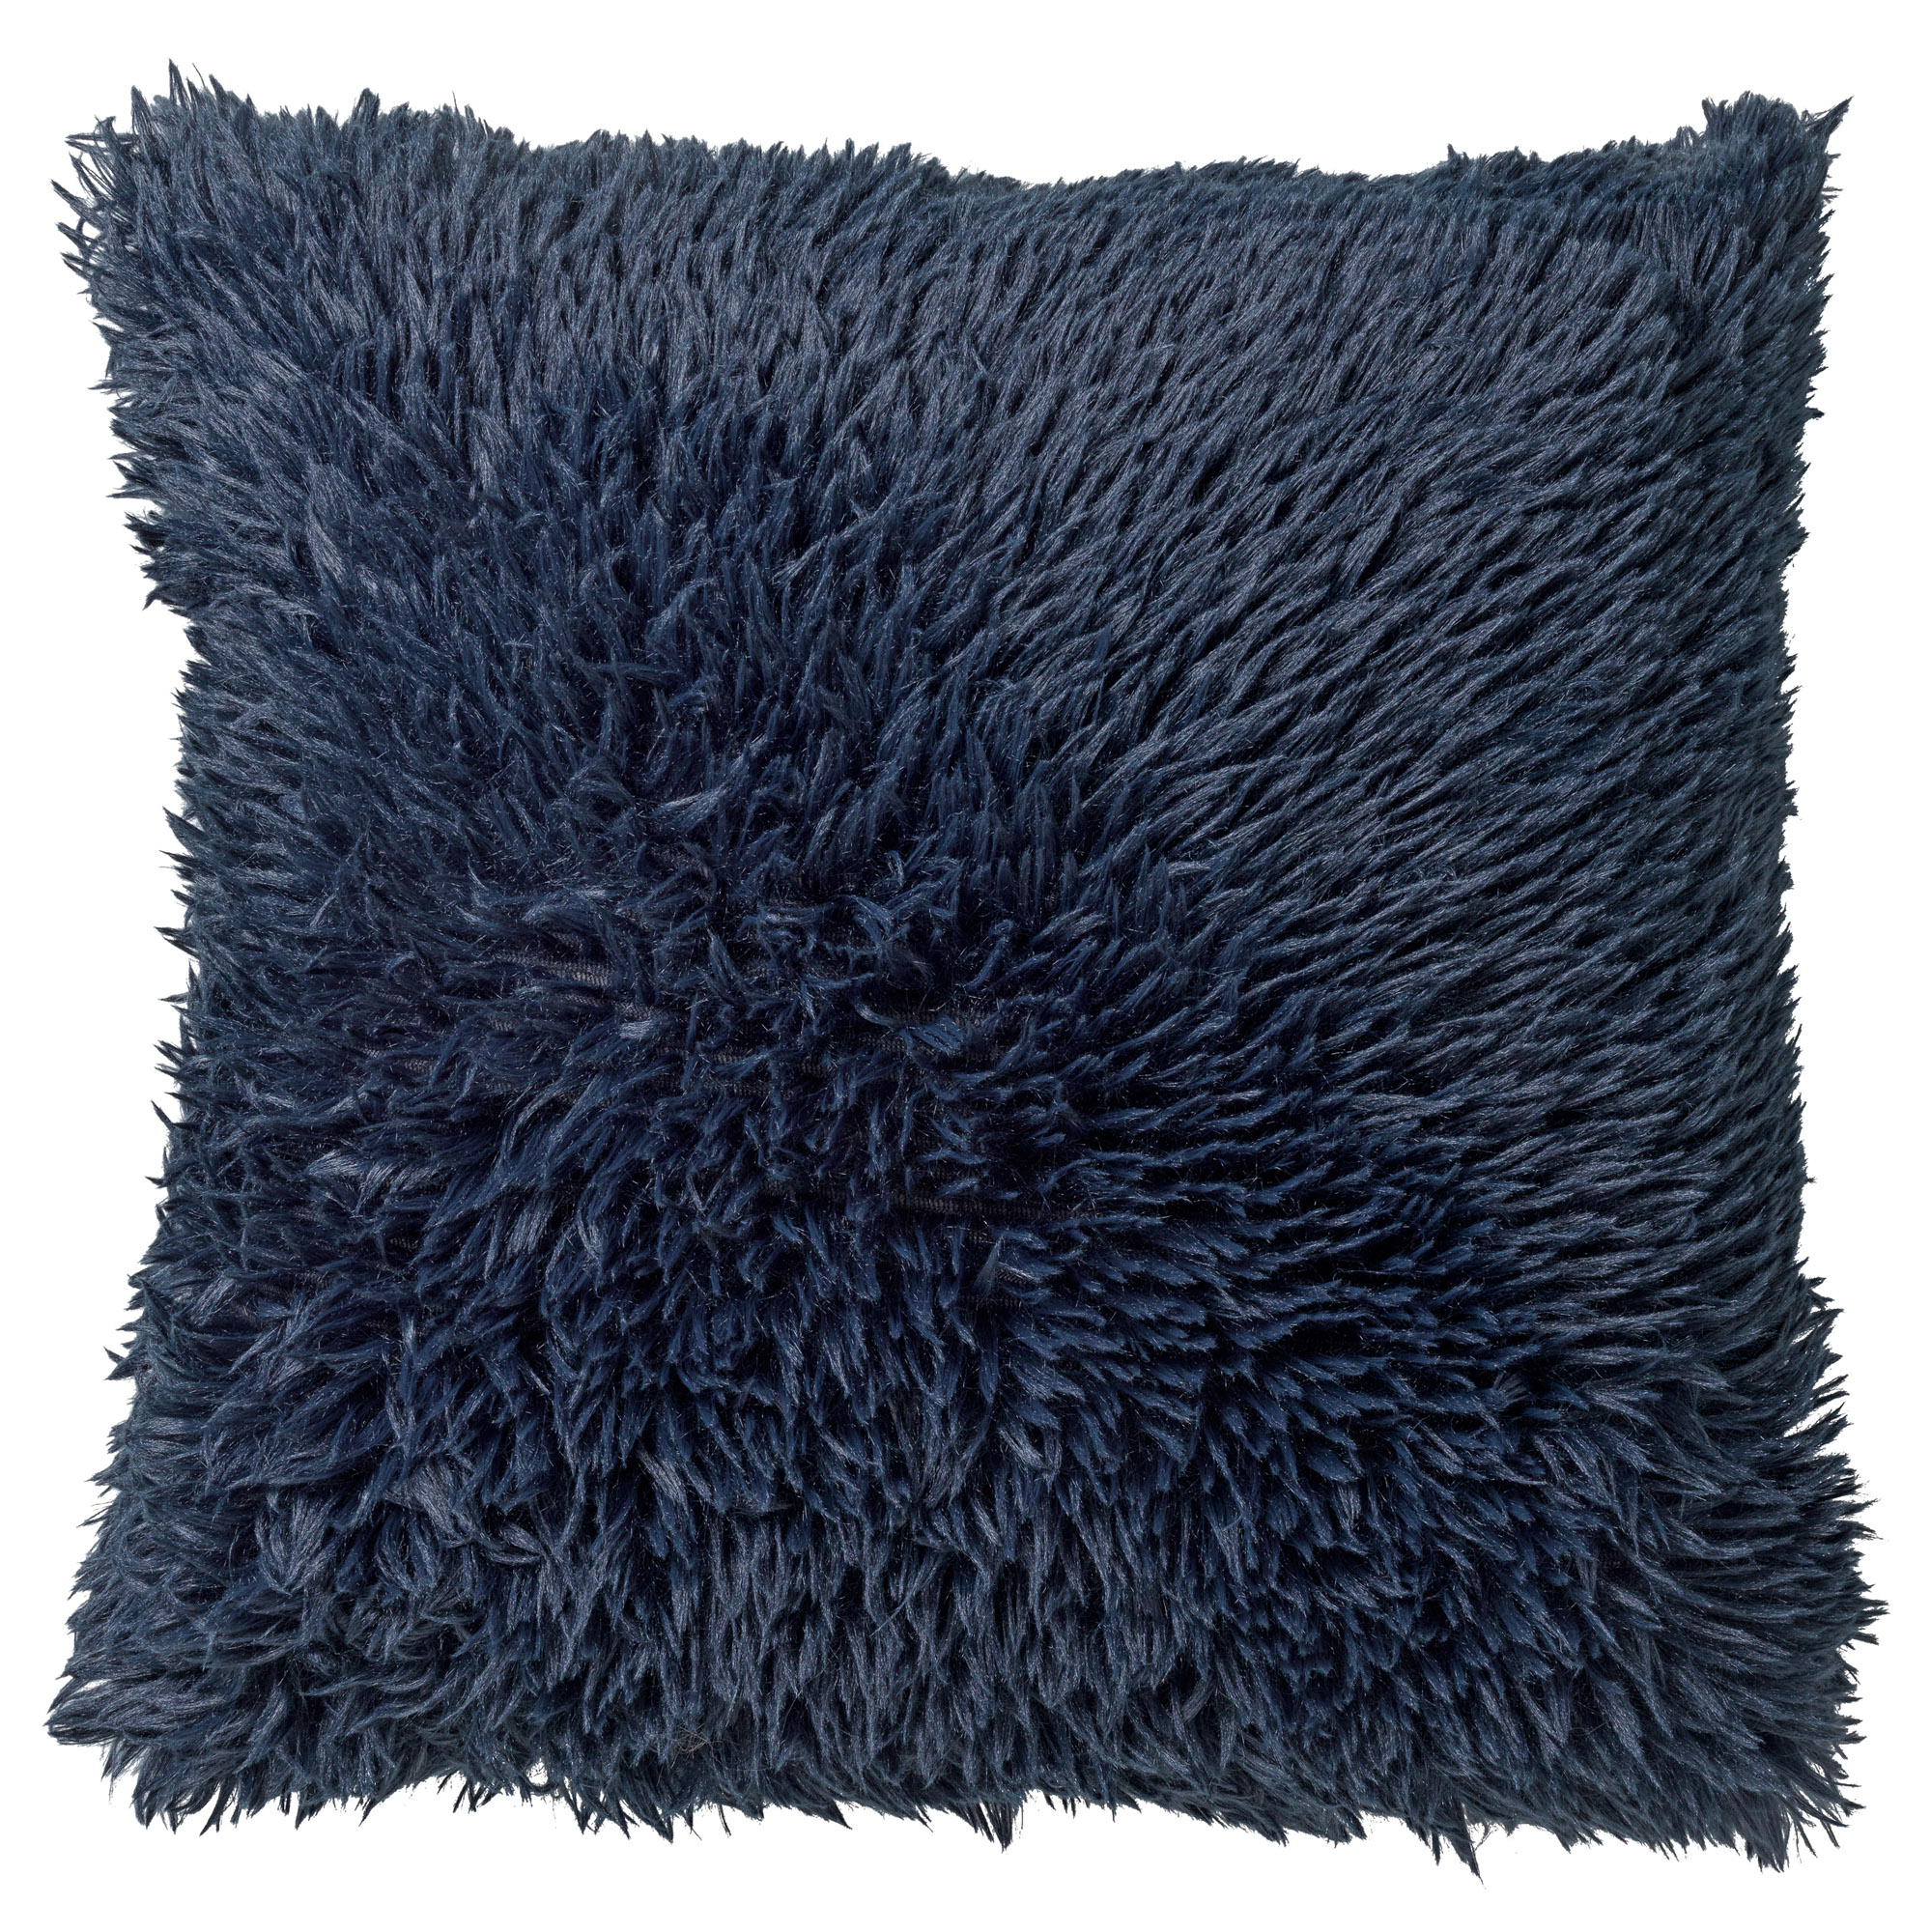 FLUFFY - Kussenhoes 60x60 cm - Insignia Blue - donkerblauw - superzacht - XL formaat